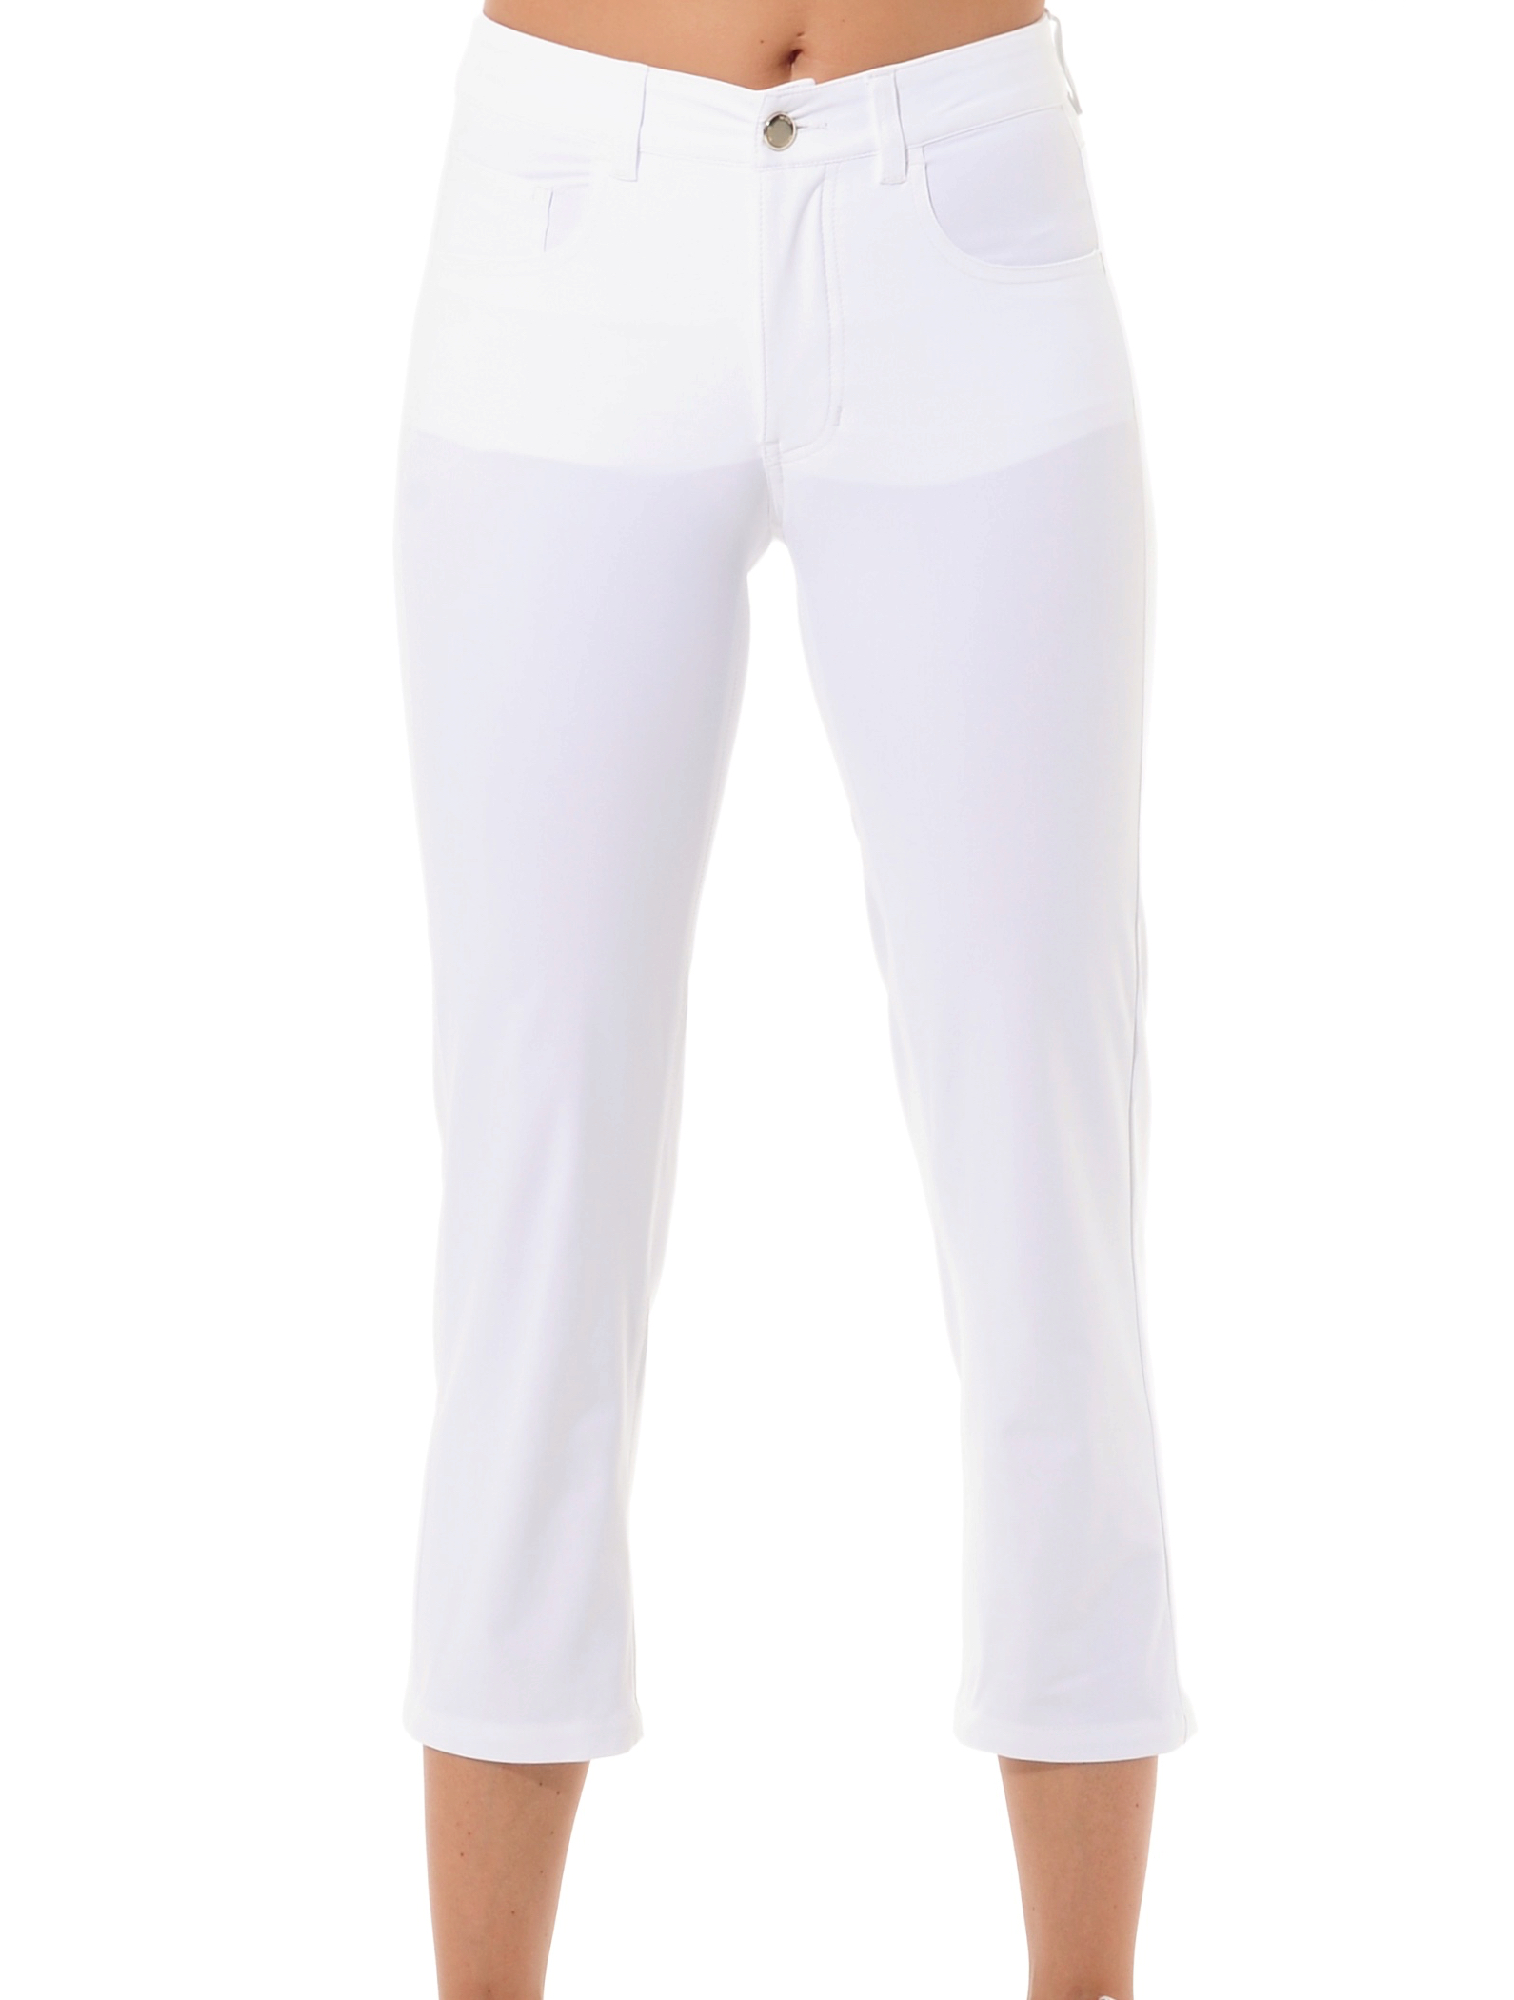 4way stretch cropped straight cut pants white 